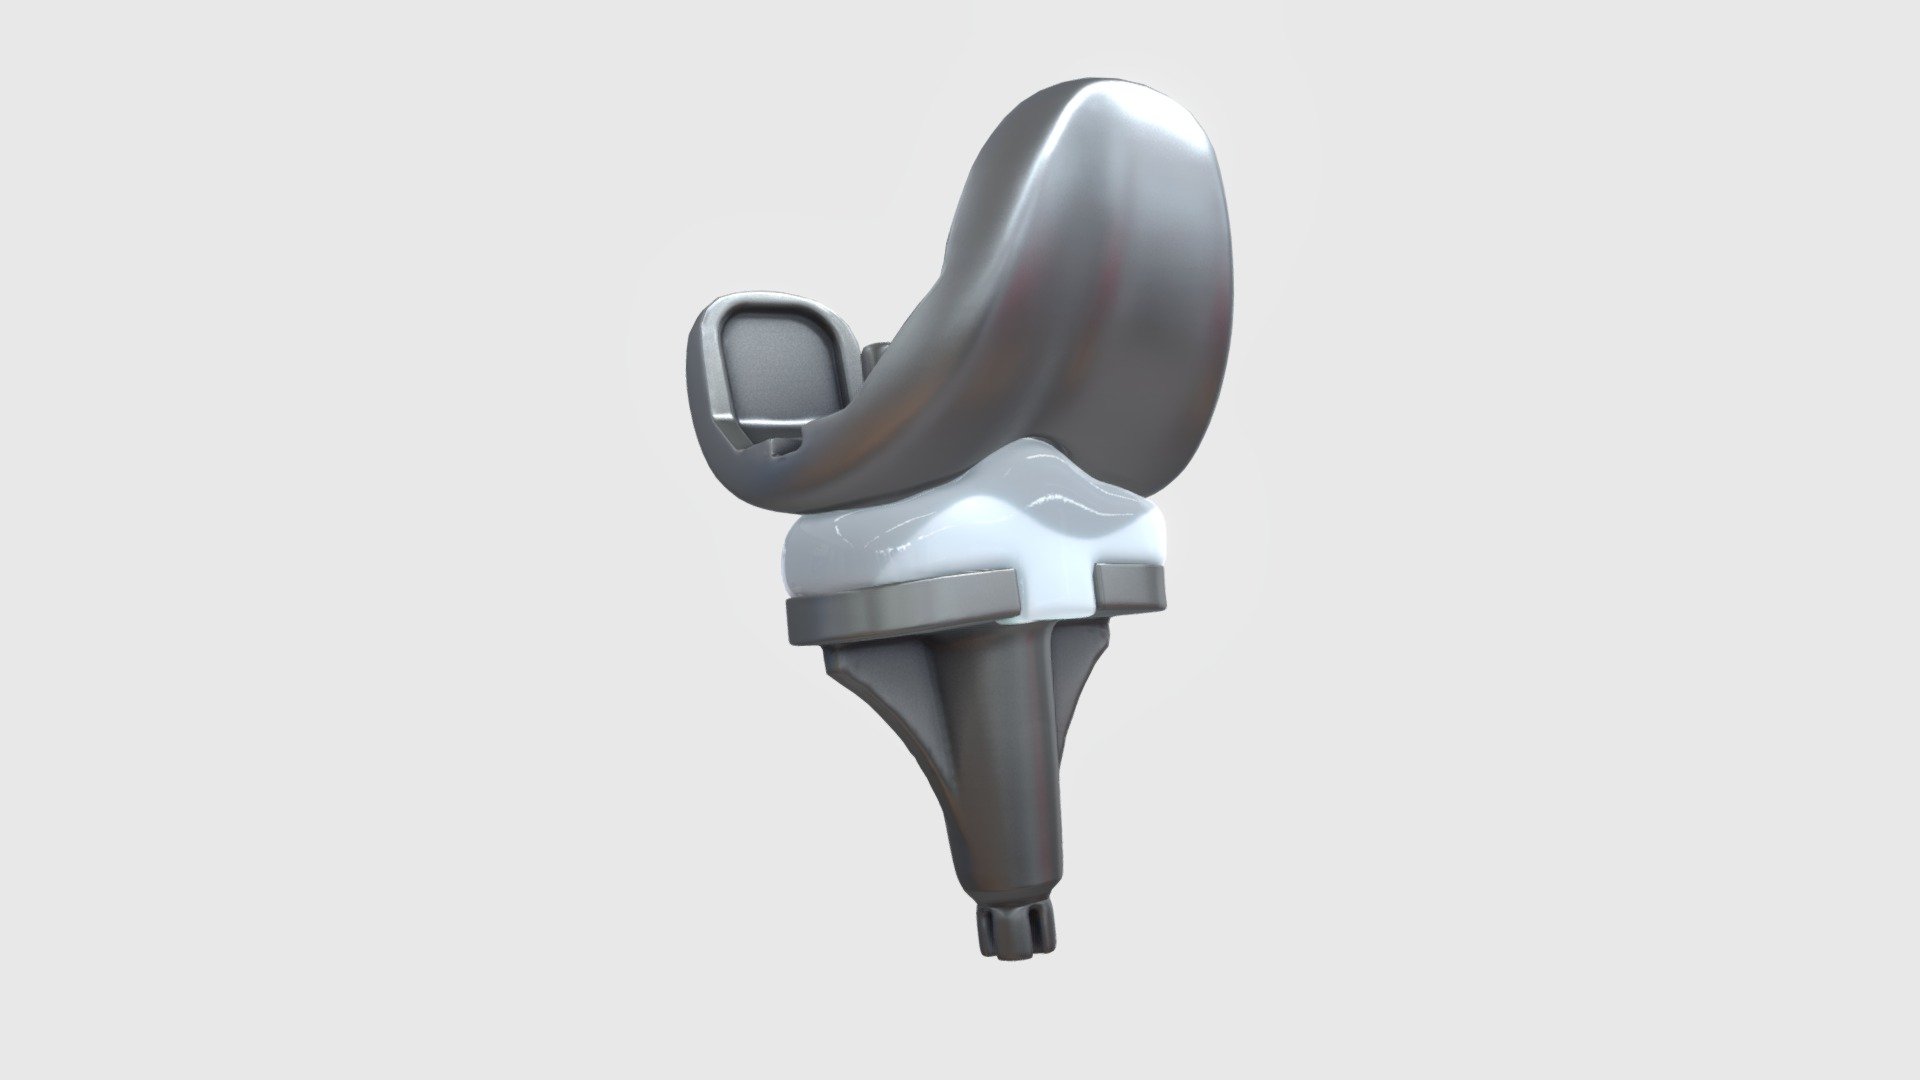 Knee Replacement Implant Buy Royalty Free 3d Model By Zames1992